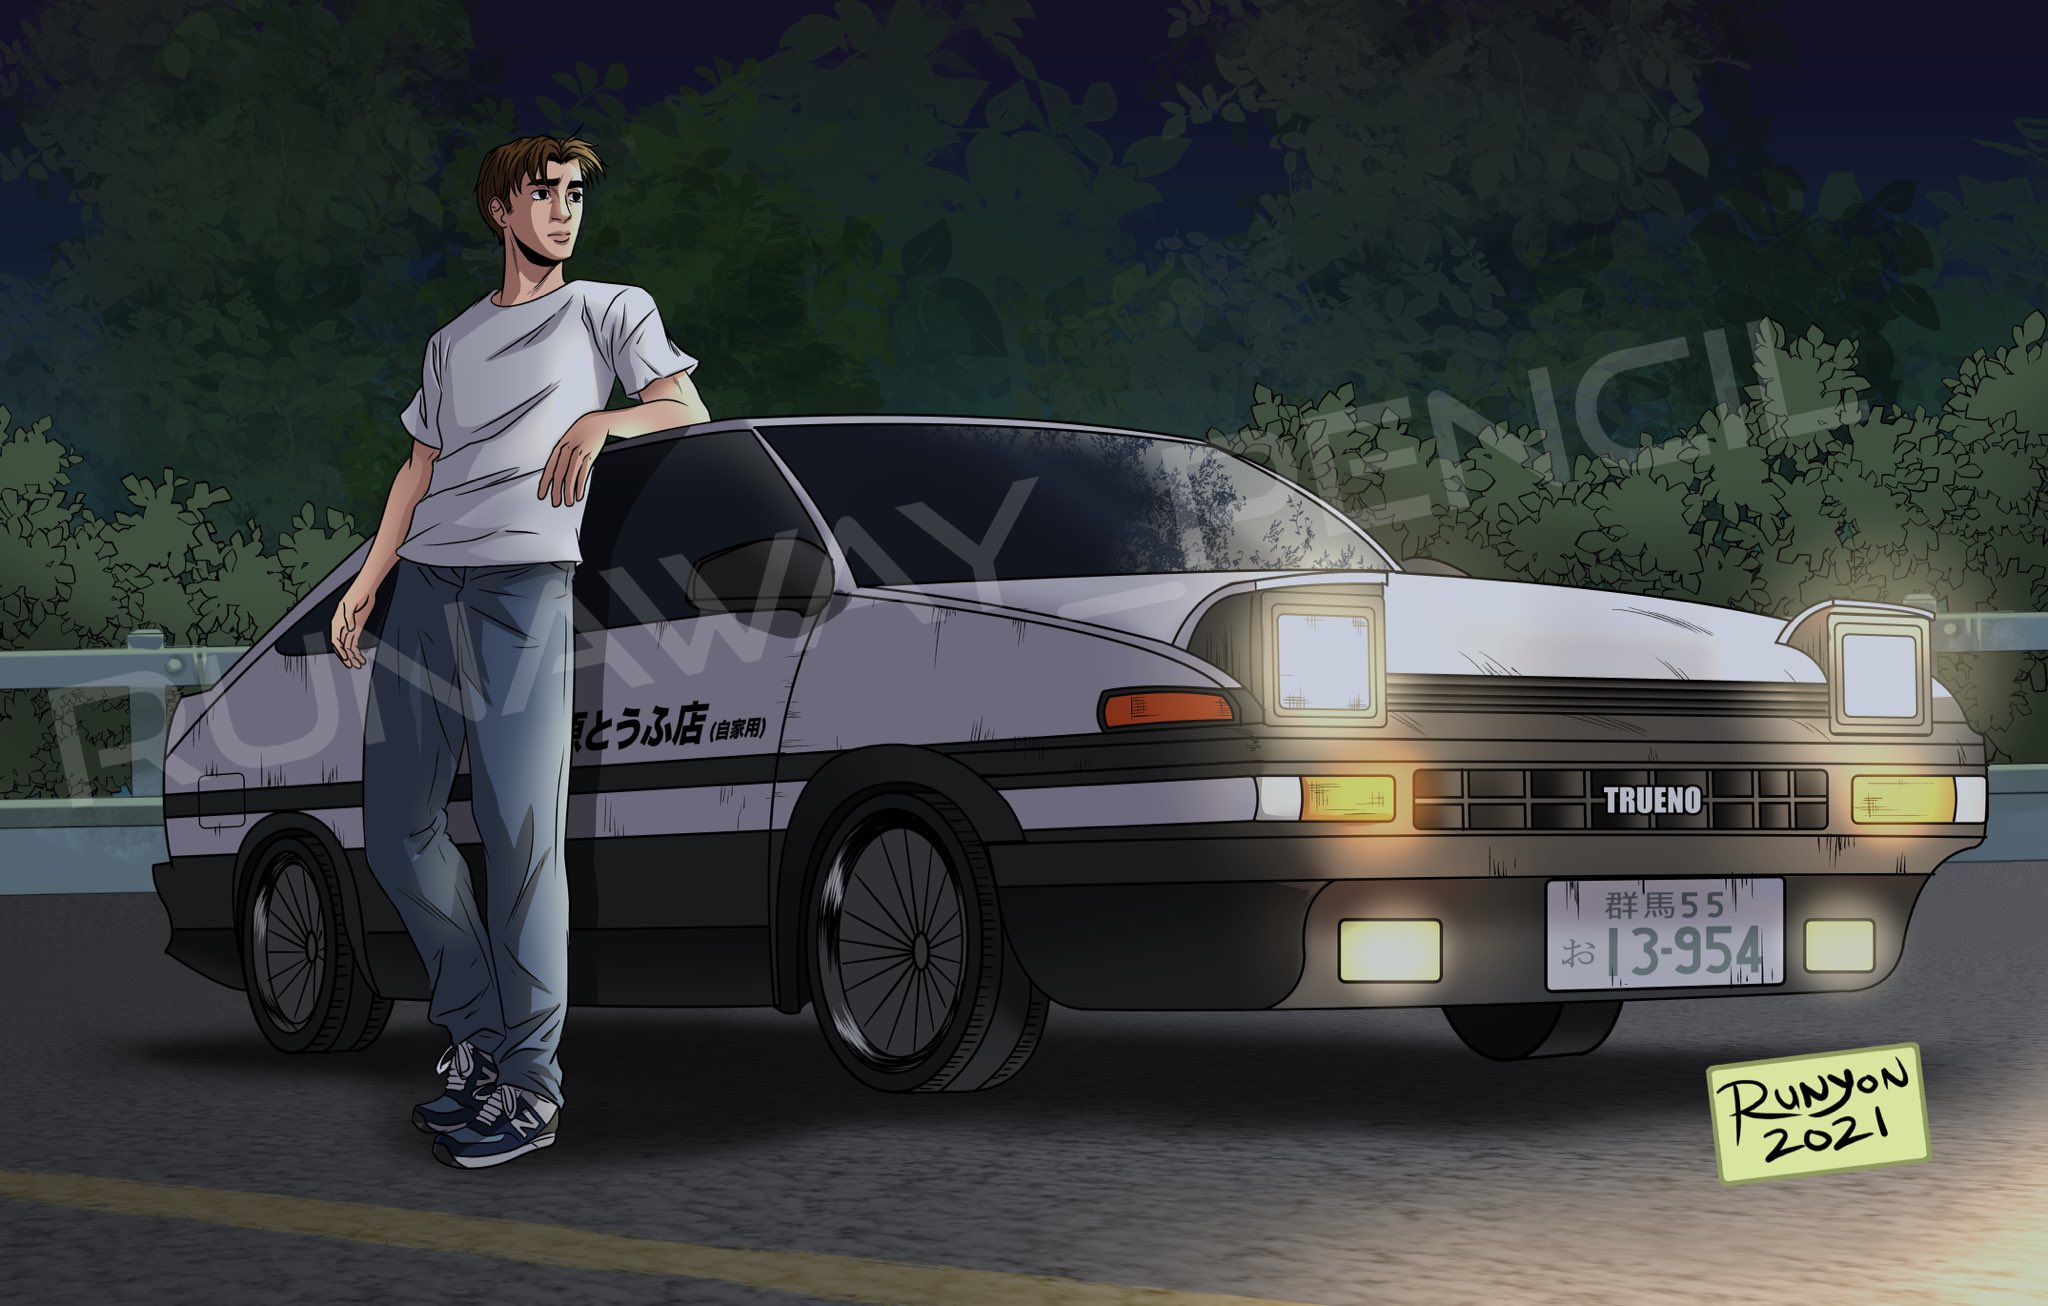 Top 999+ Initial D Wallpaper Full HD, 4K✓Free to Use